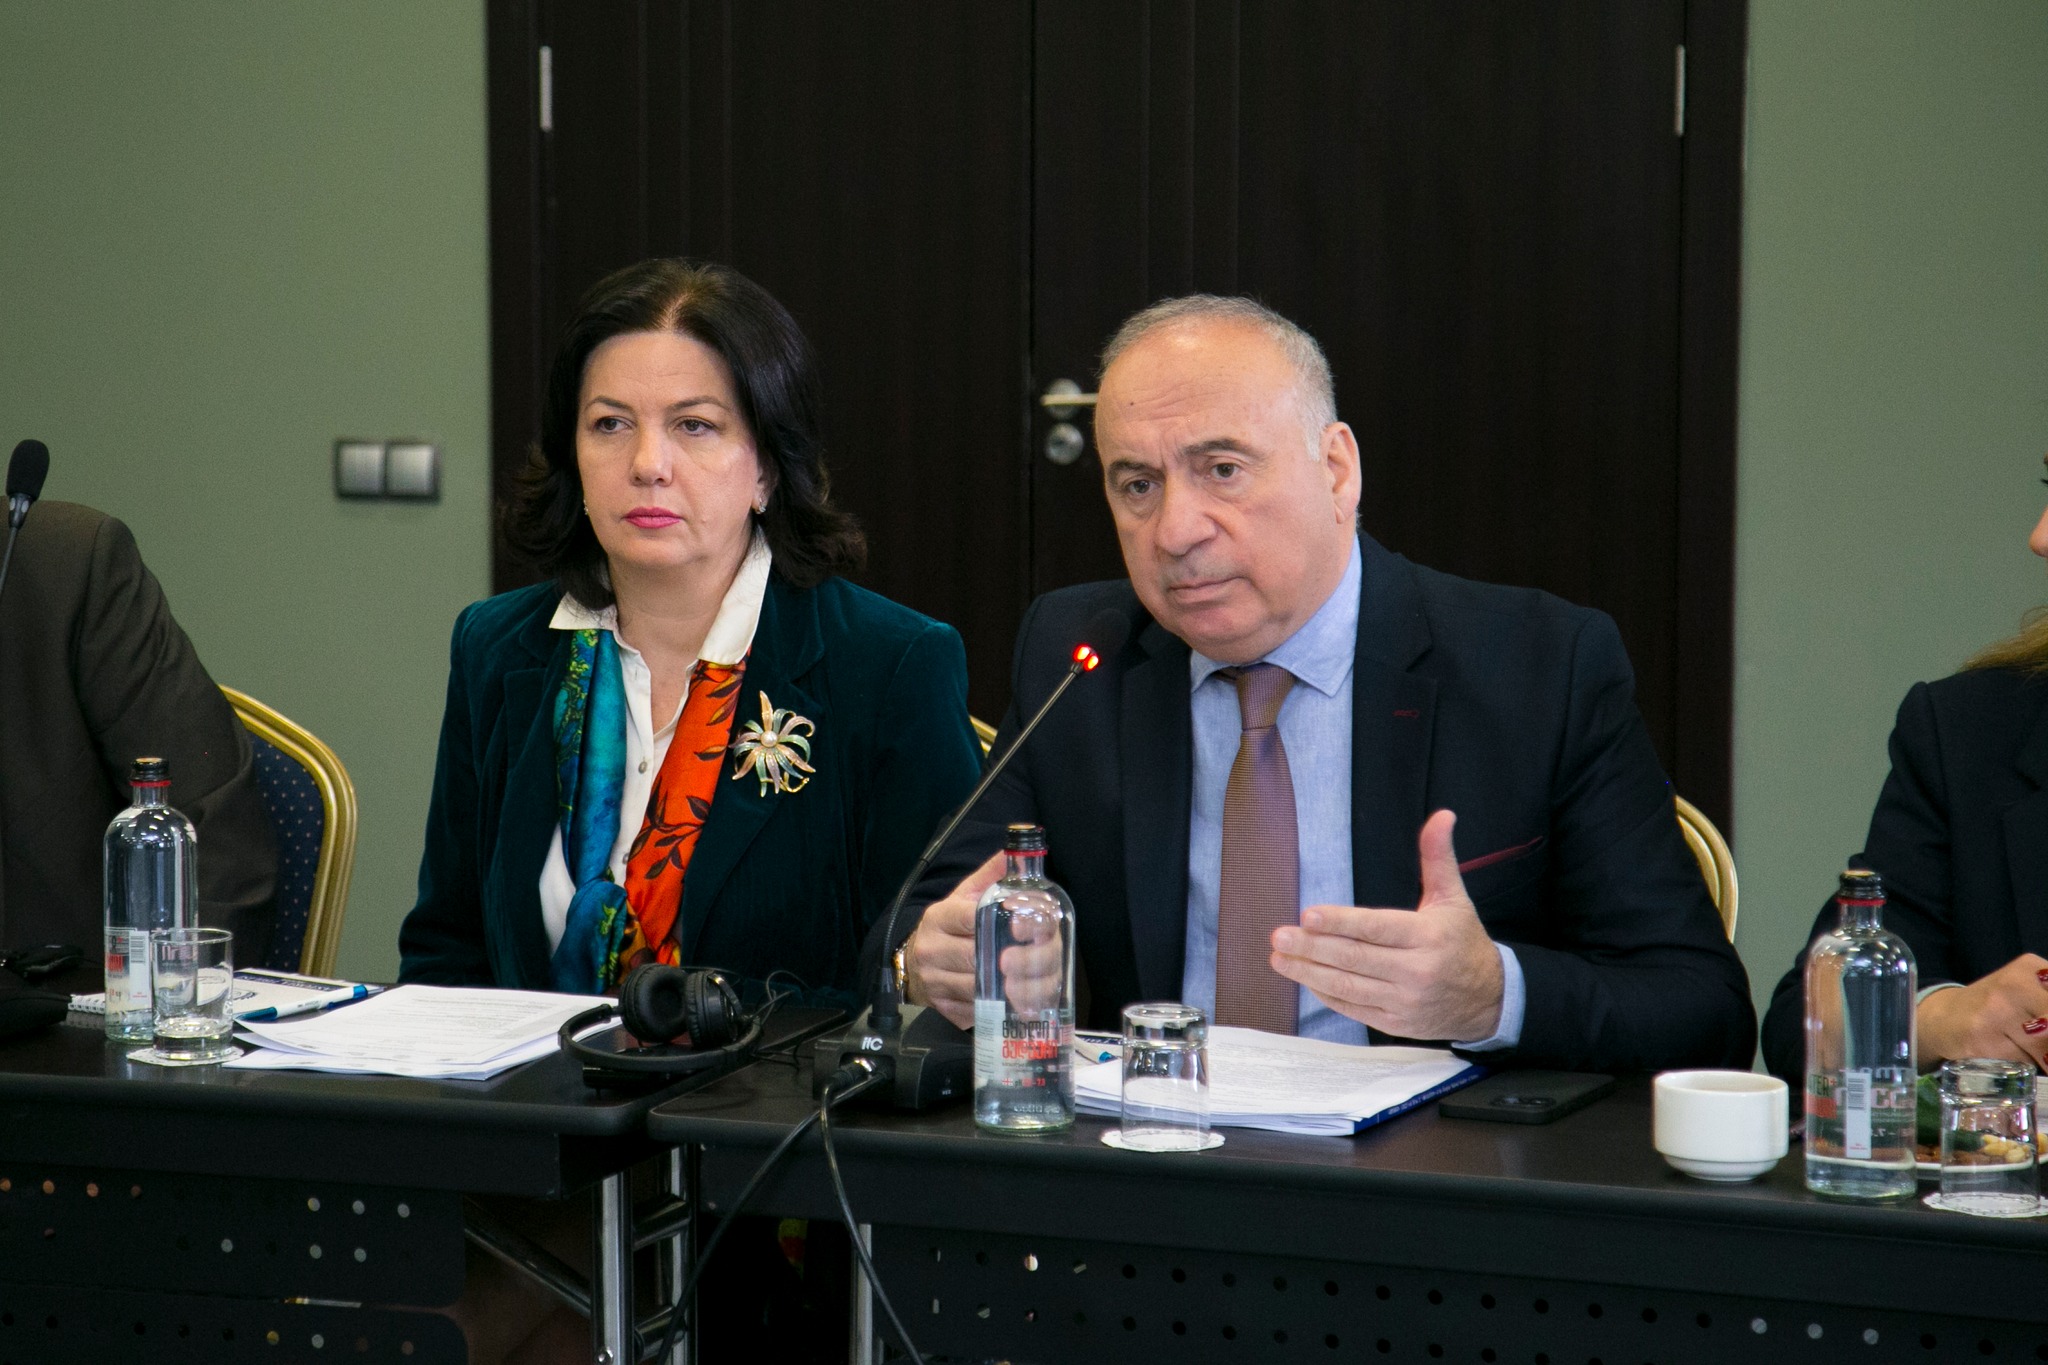 The meeting on Forestry Education was held